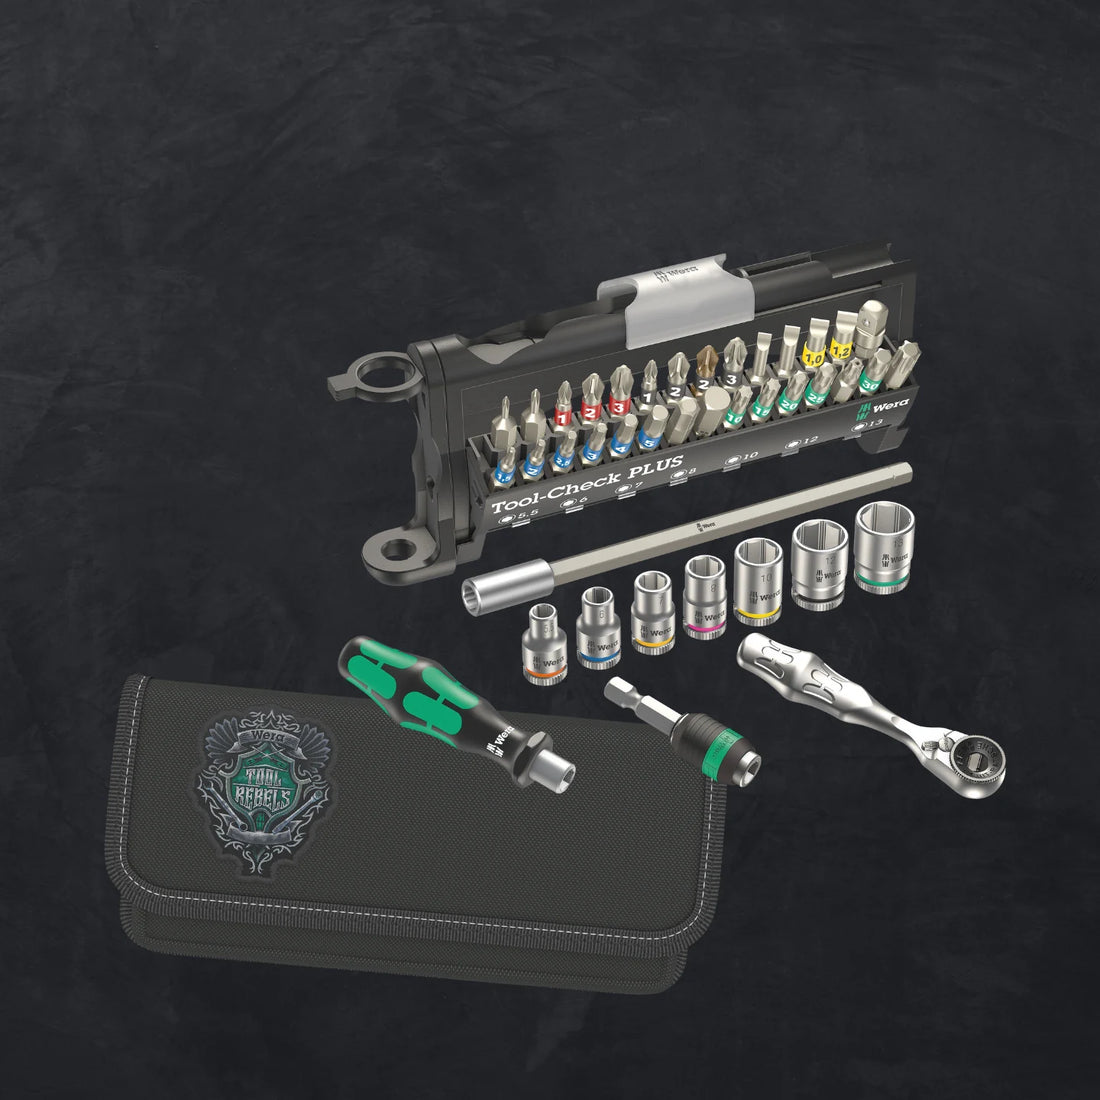 Become a Tool Rebel with the tools from Wera - reichelt Magazin